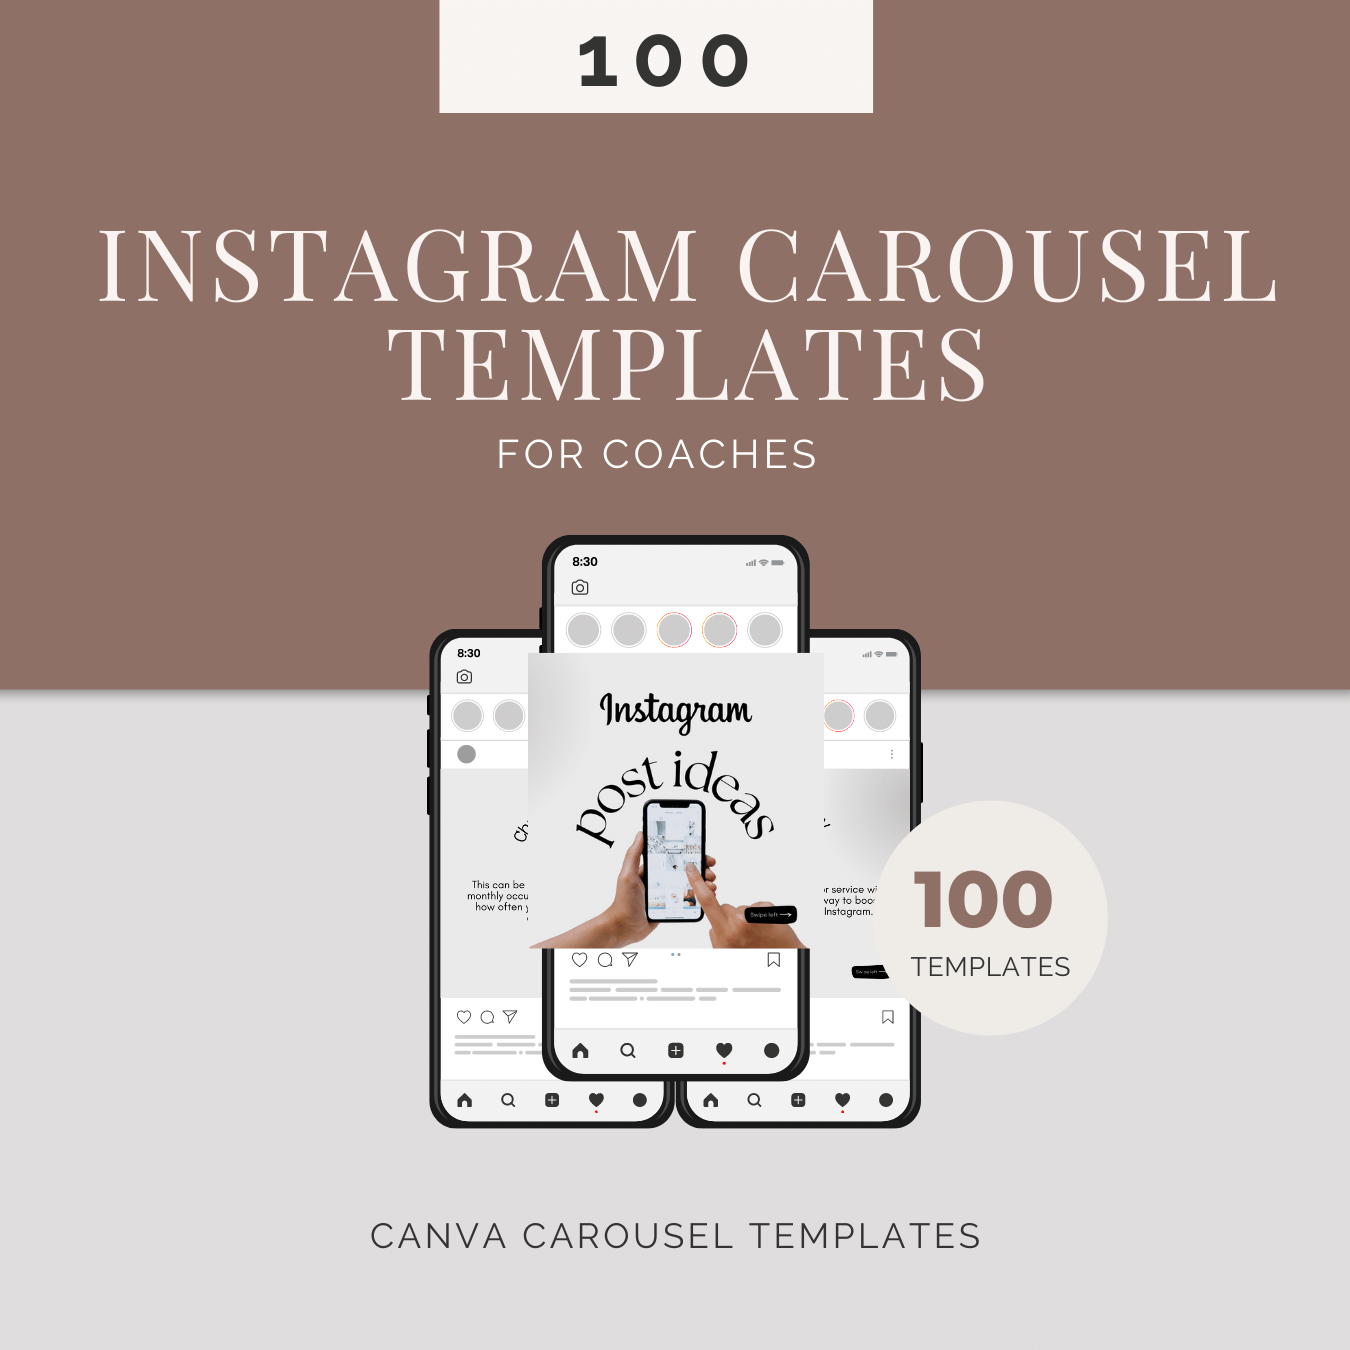 100 Instagram carousel templates for coaches, Canva carousel templates